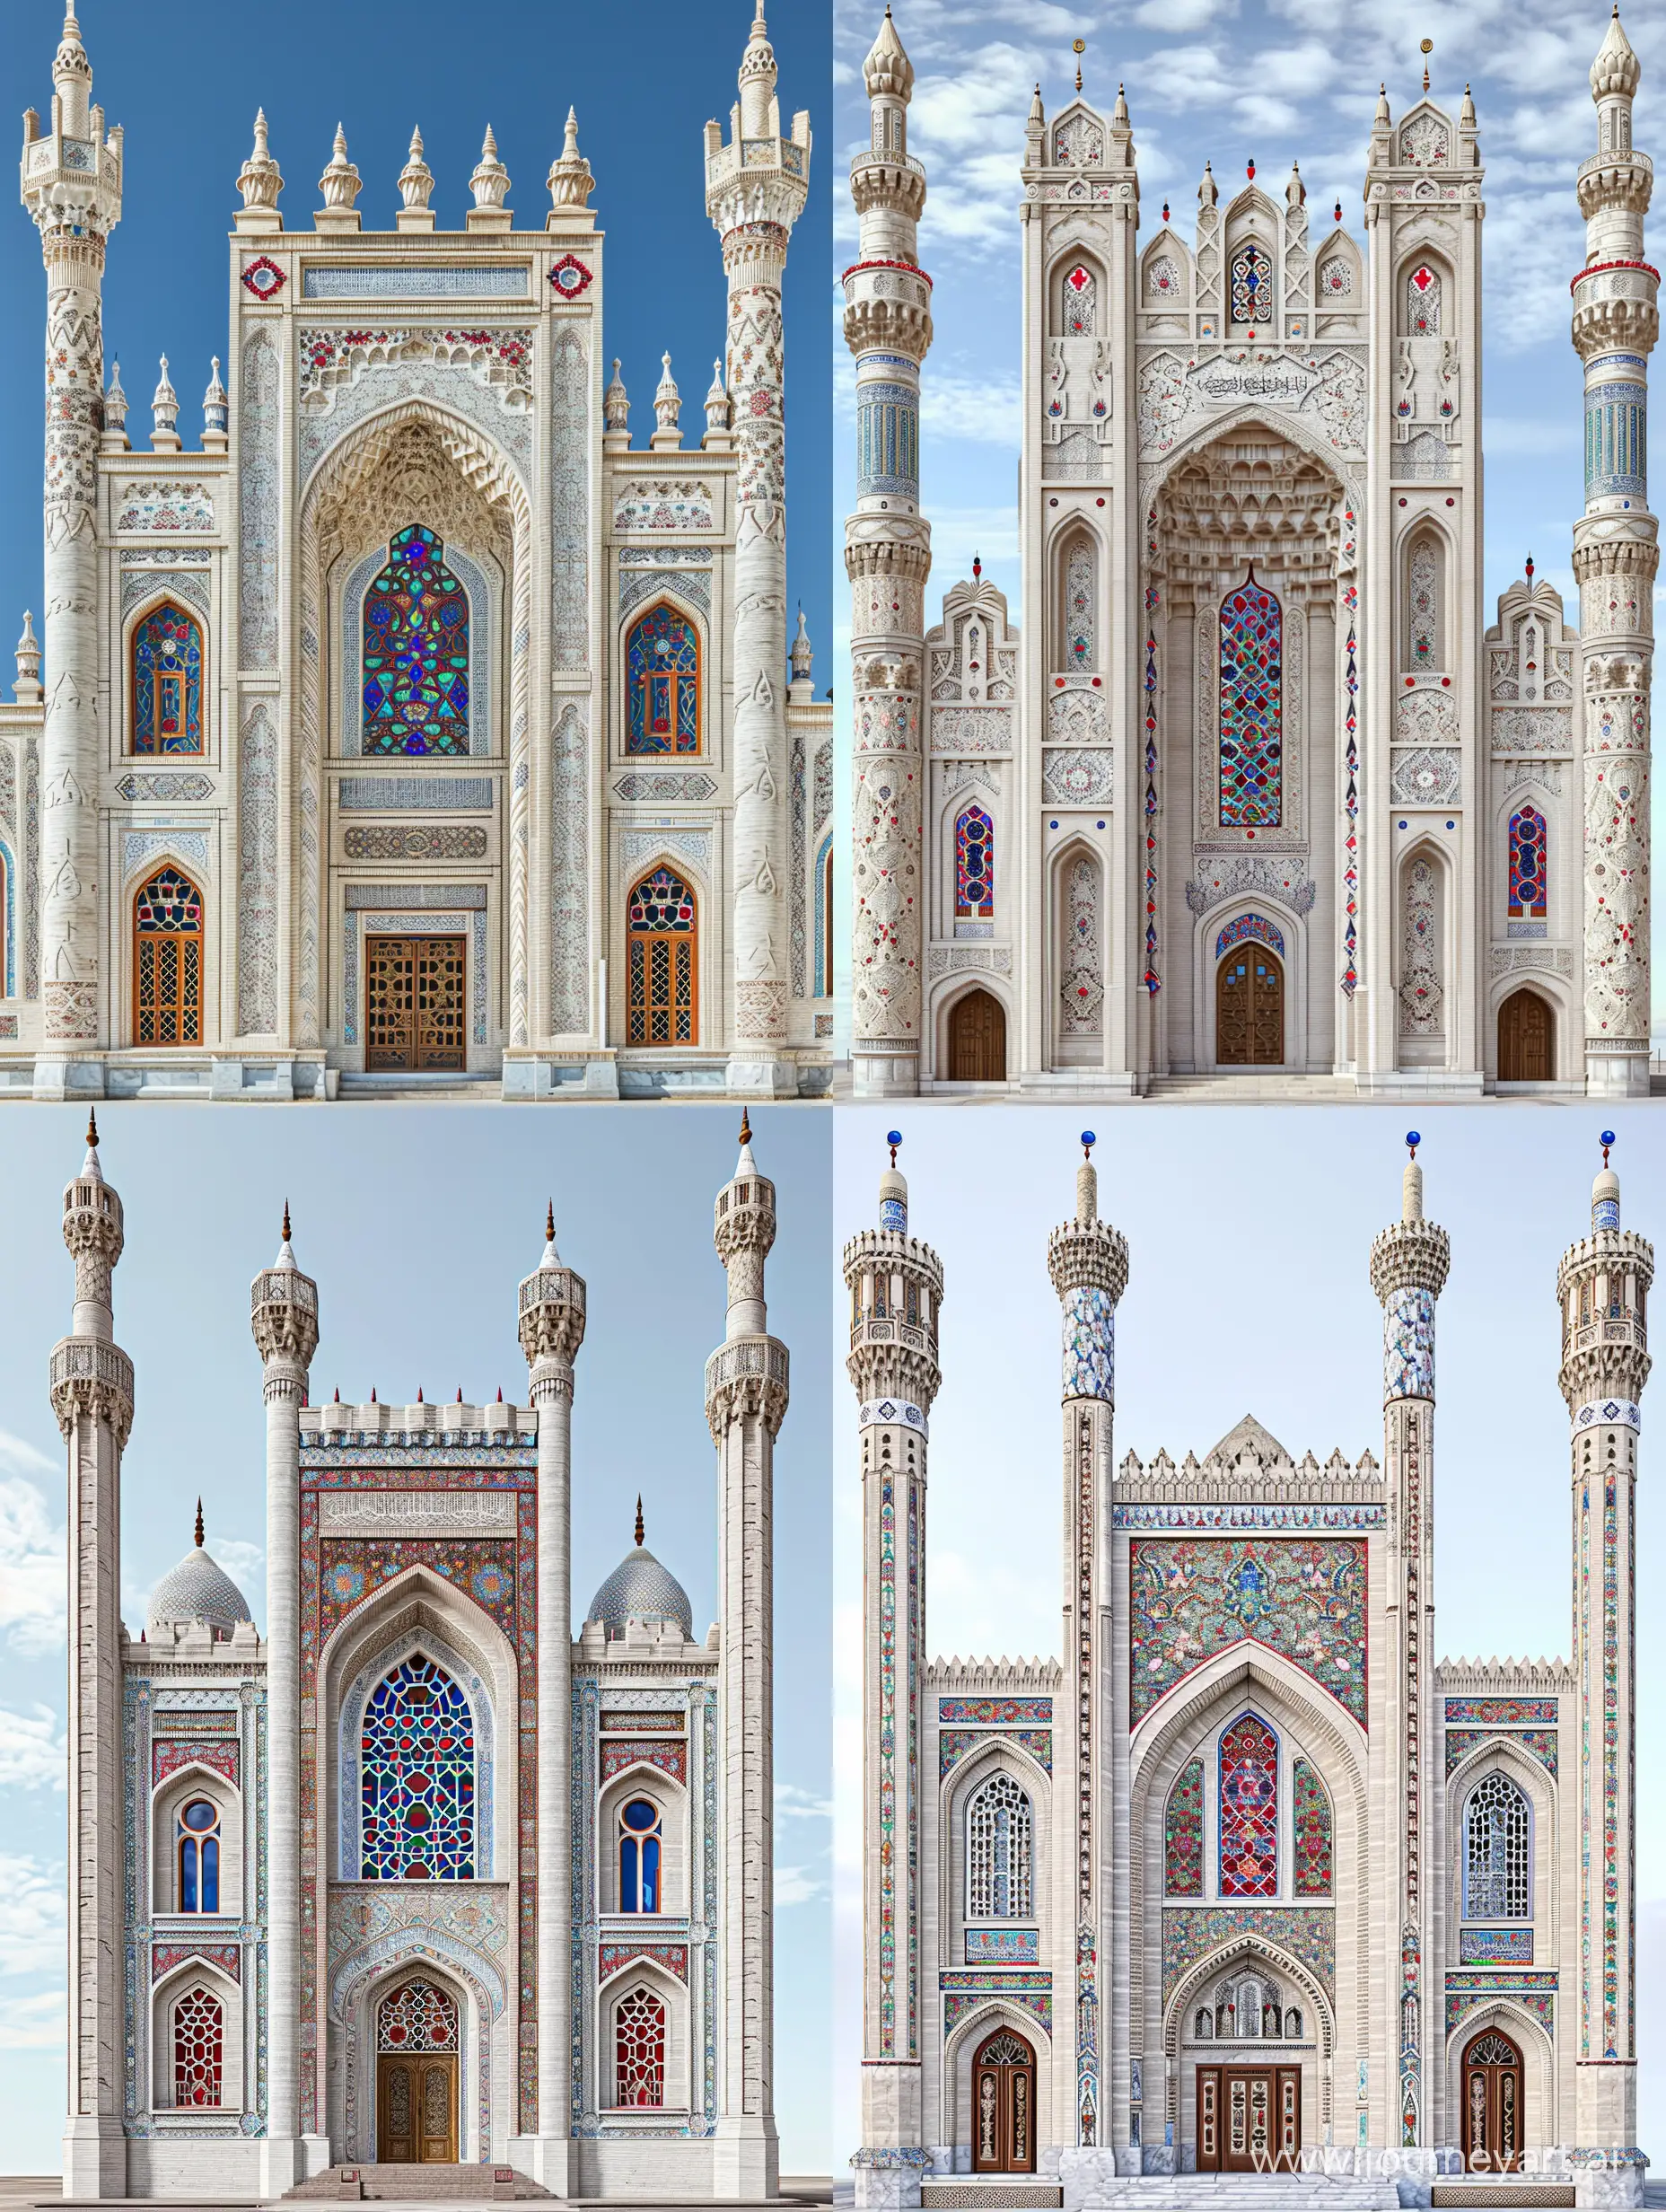 an Uzbekistan style multi level mosque, highly decorated with arabesque carvings, White marbled  brick exterior, tall iwan with muqarnas, islamic stained glass windows, red blue persian floral design on spandrels, red blue gems and rubies embedded on islamic arabesque openwork ornaments, thin decorative minarets, many long decorative finials, full view, front view